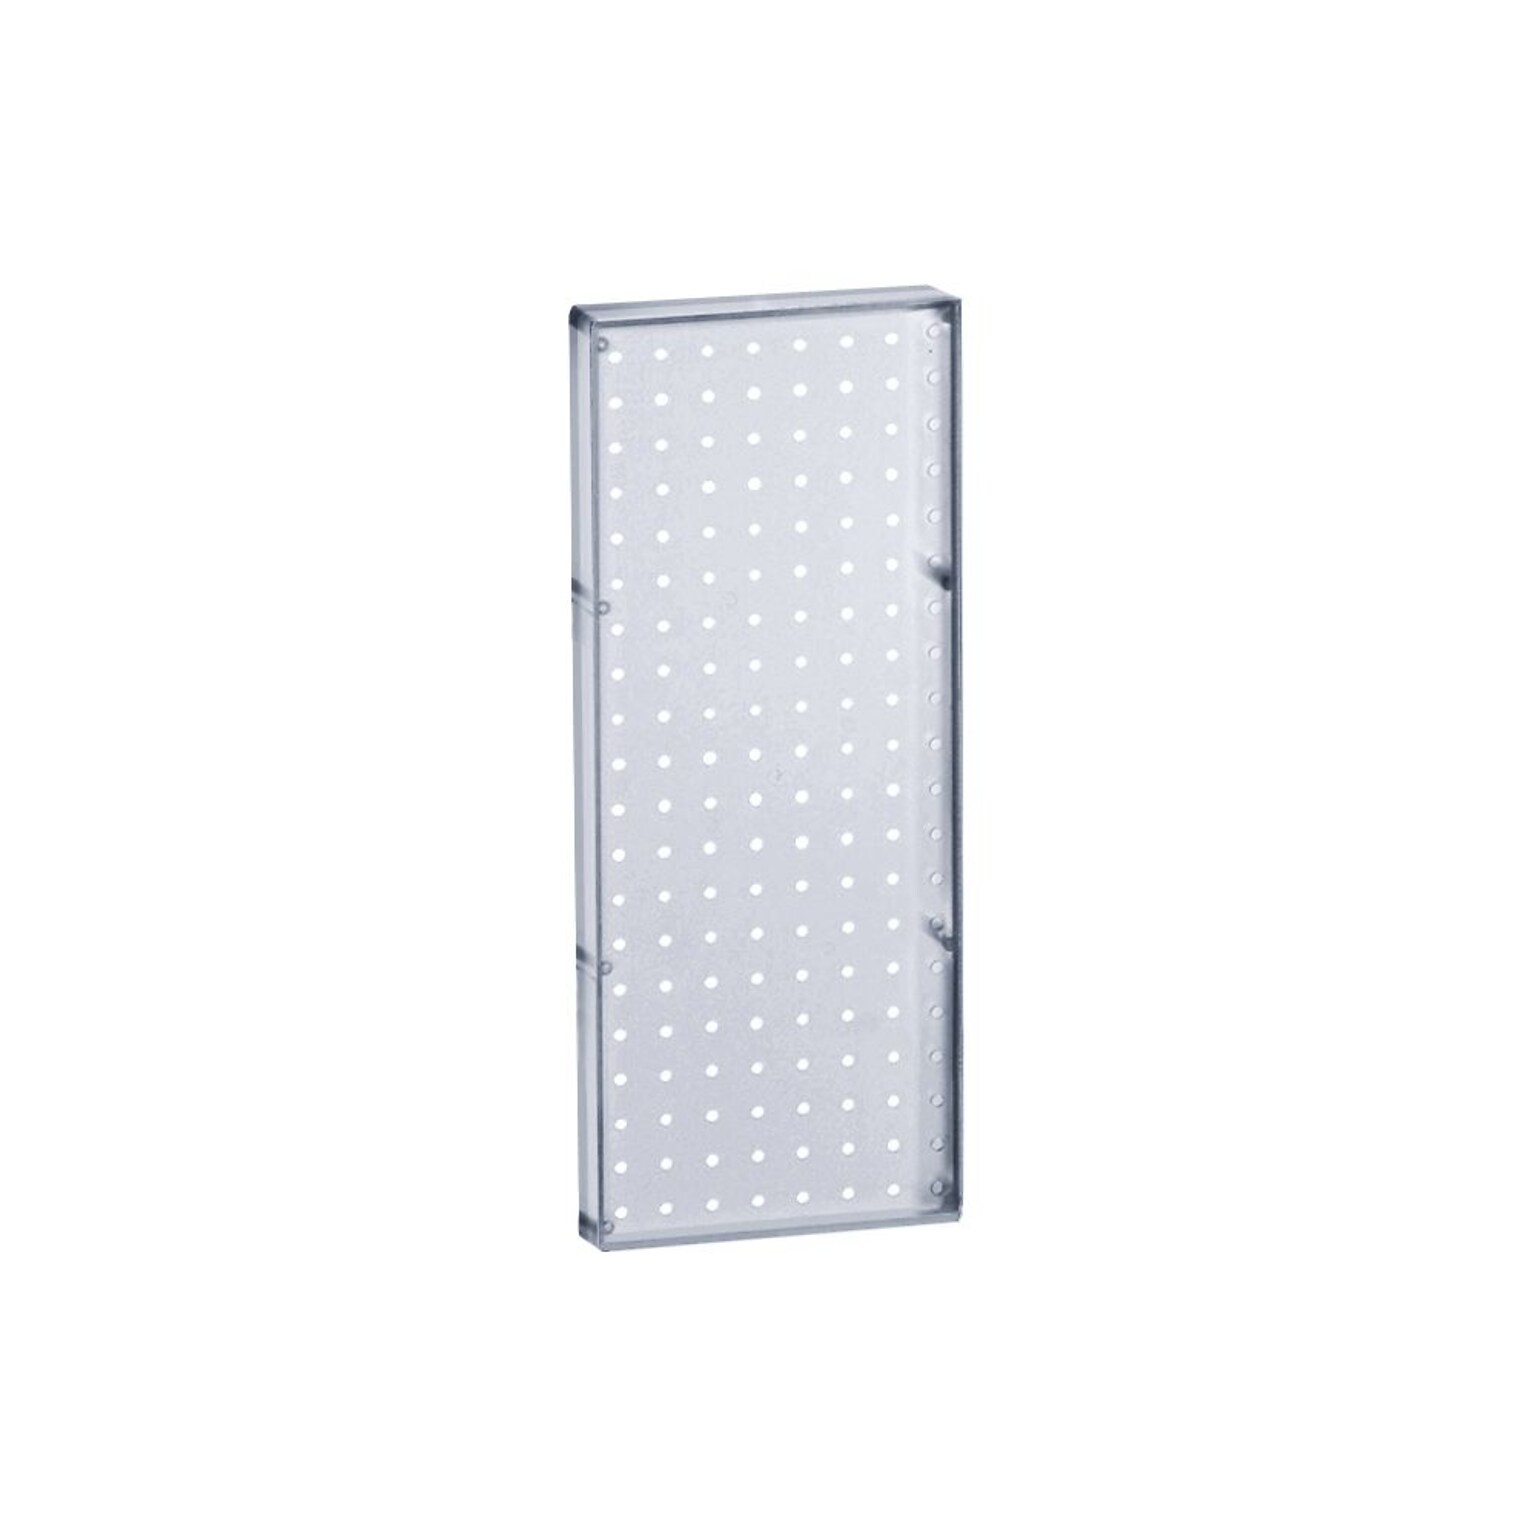 Azar® 20(H) x 8(W) Pegboard 1-Sided Wall Panel, Translucent Clear, 2/Pack (770820-CLR-2PK)